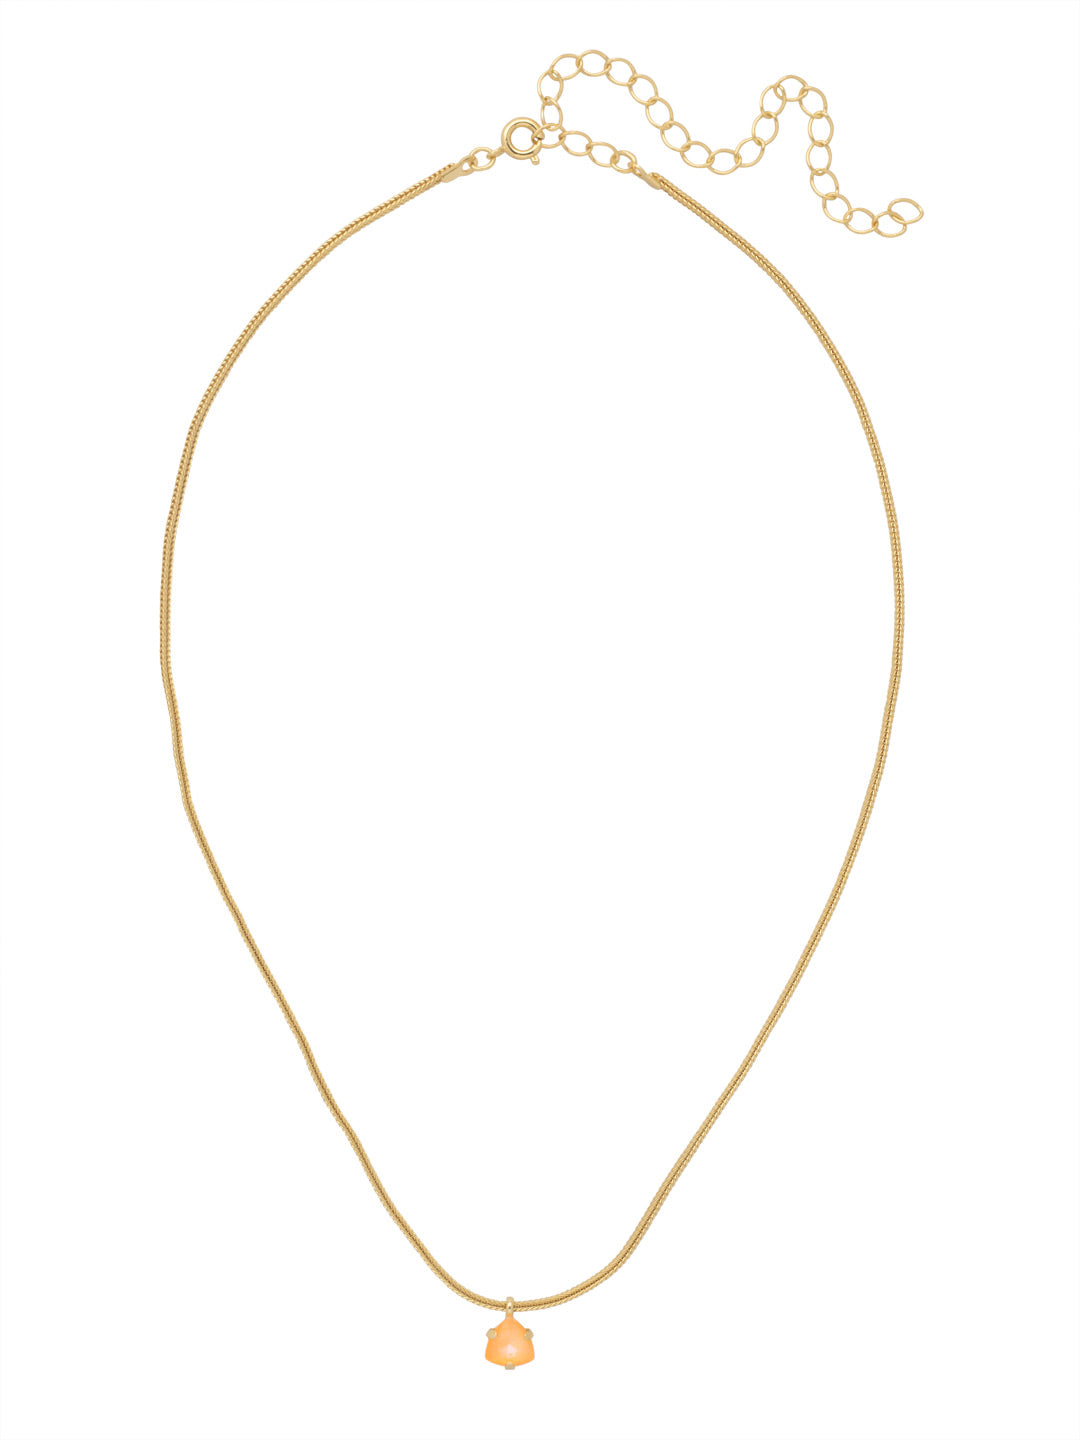 Sedge Stud Pendant Necklace - NFM5BGETO - <p>The Sedge Stud Pendant Necklace features an adjustable thin snake chain necklace with a single trillion cut stud secured with a lobster claw clasp. From Sorrelli's Electric Orange collection in our Bright Gold-tone finish.</p>